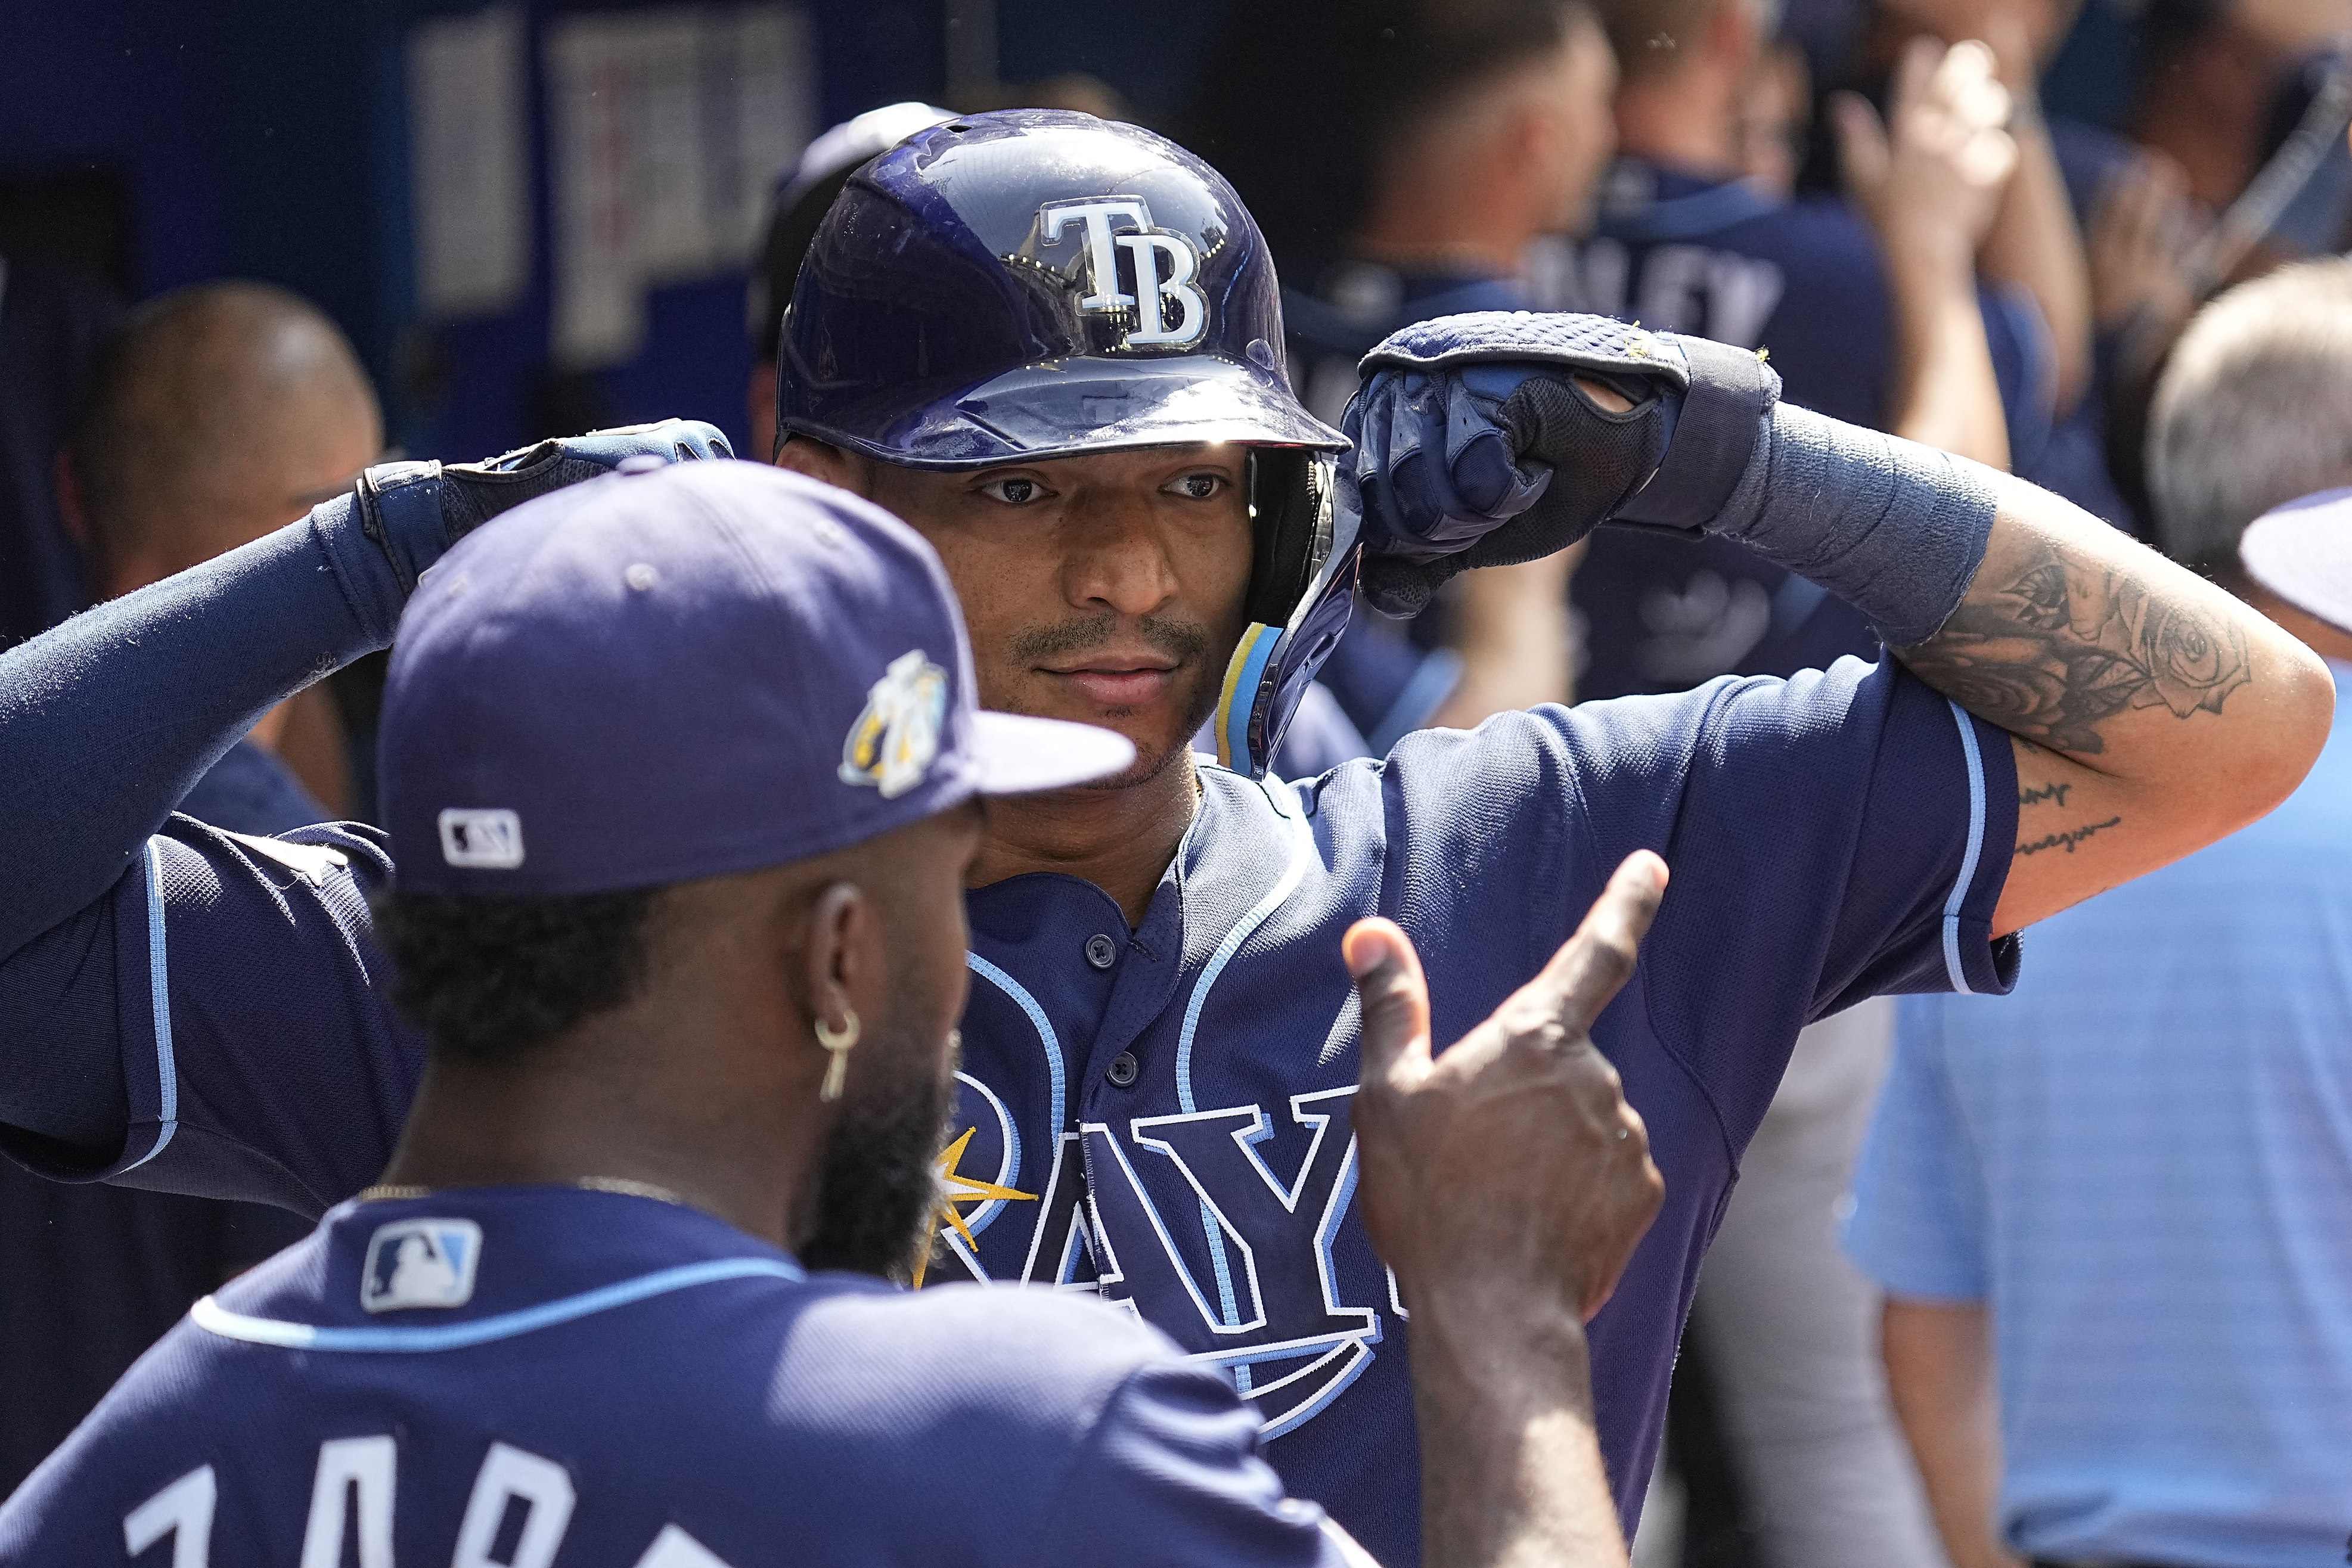 Shane McClanahan improves to 4-0 after helping Rays return to the